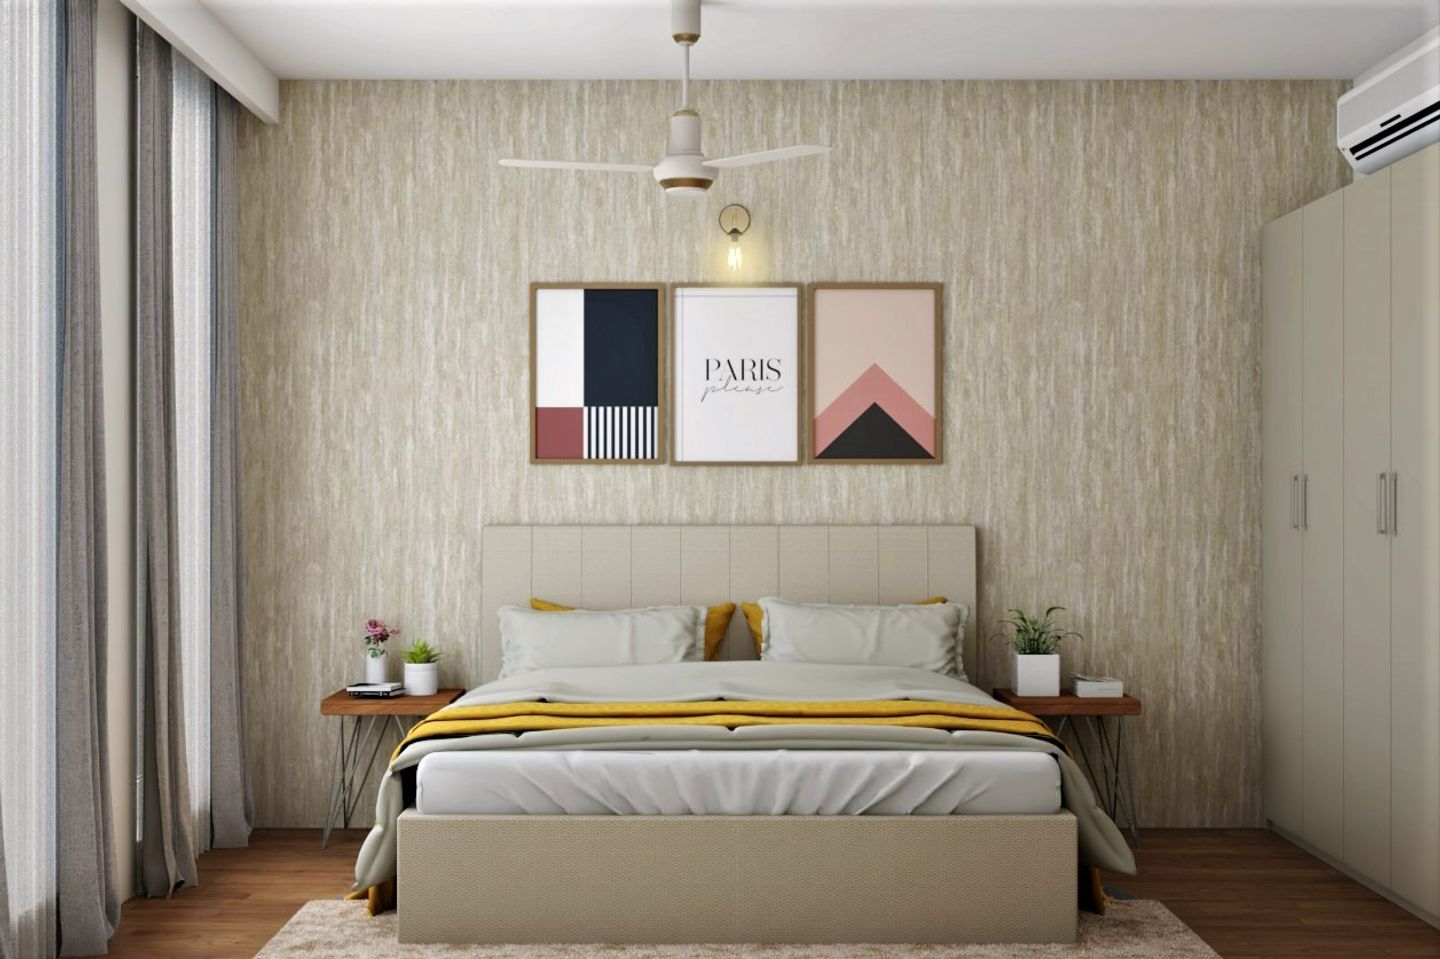 Easy To Maintain Guest Room Design With Contemporary Interiors - Livspace